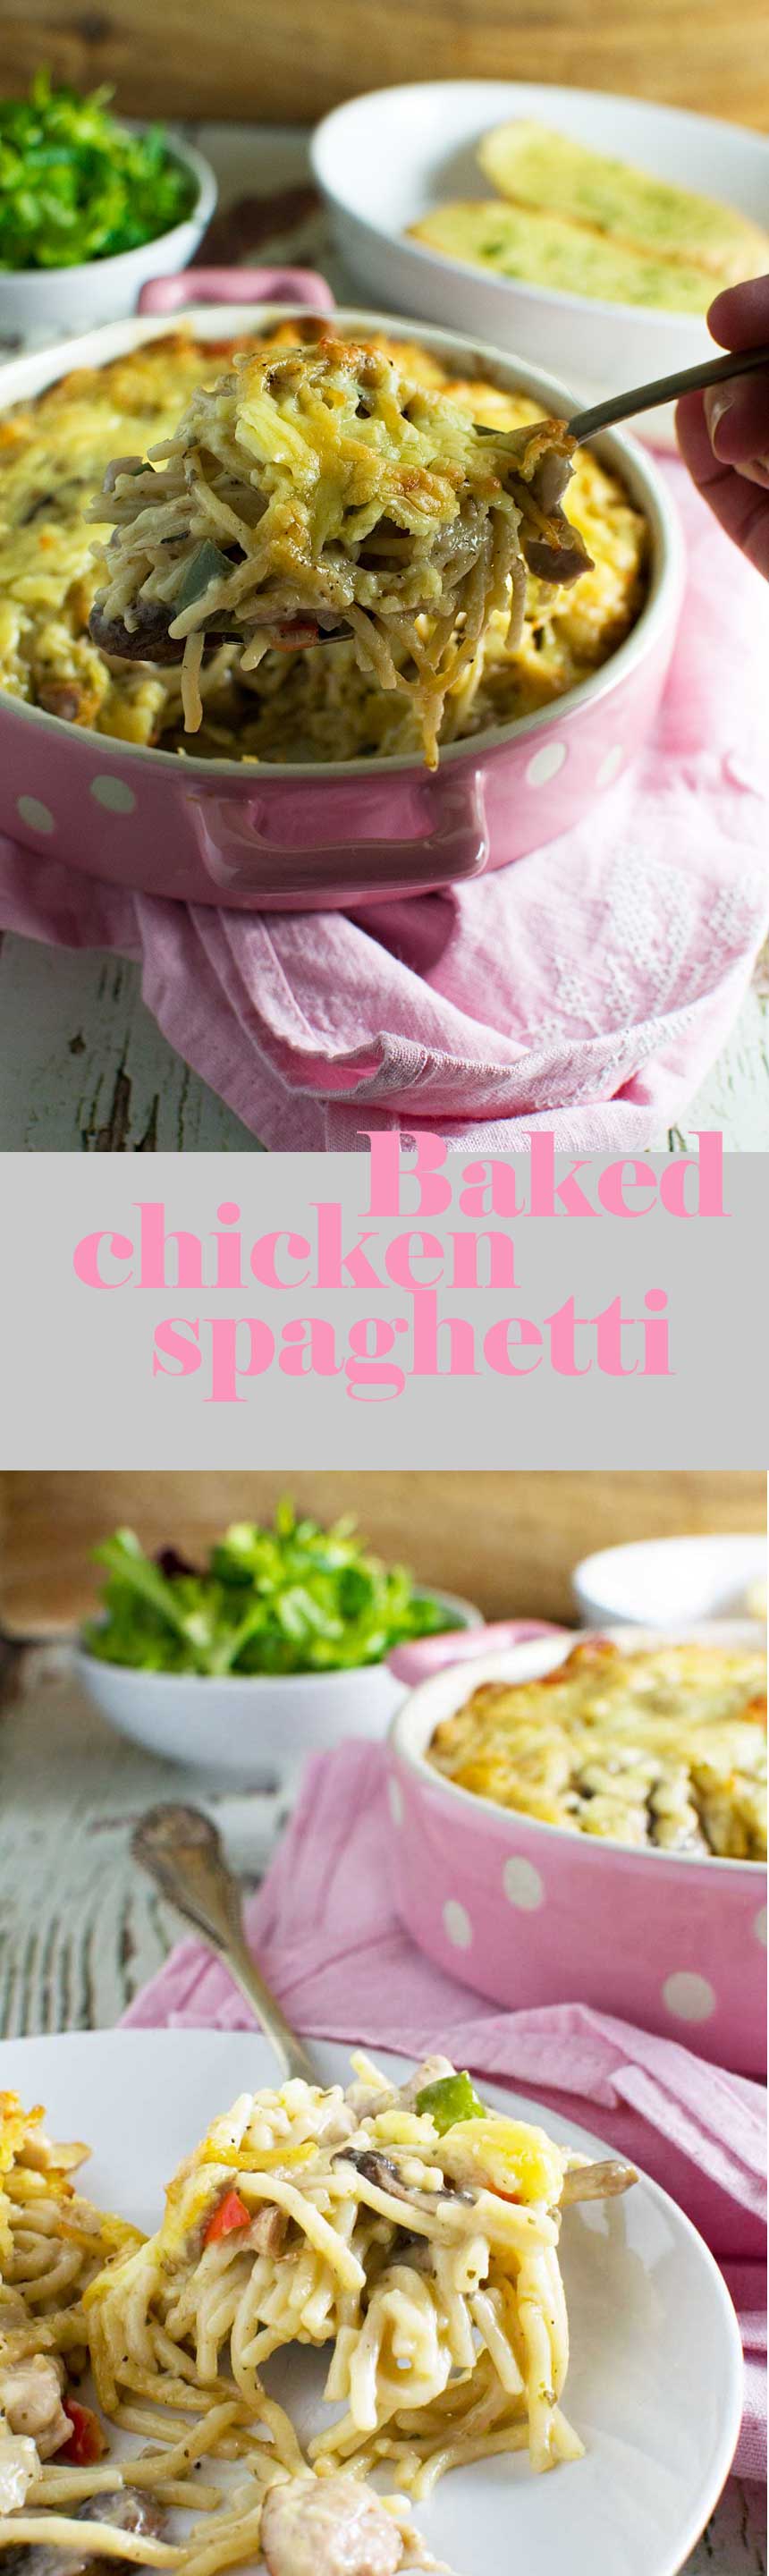 A pinterest pin for baked chicken spaghetti with a title on it.